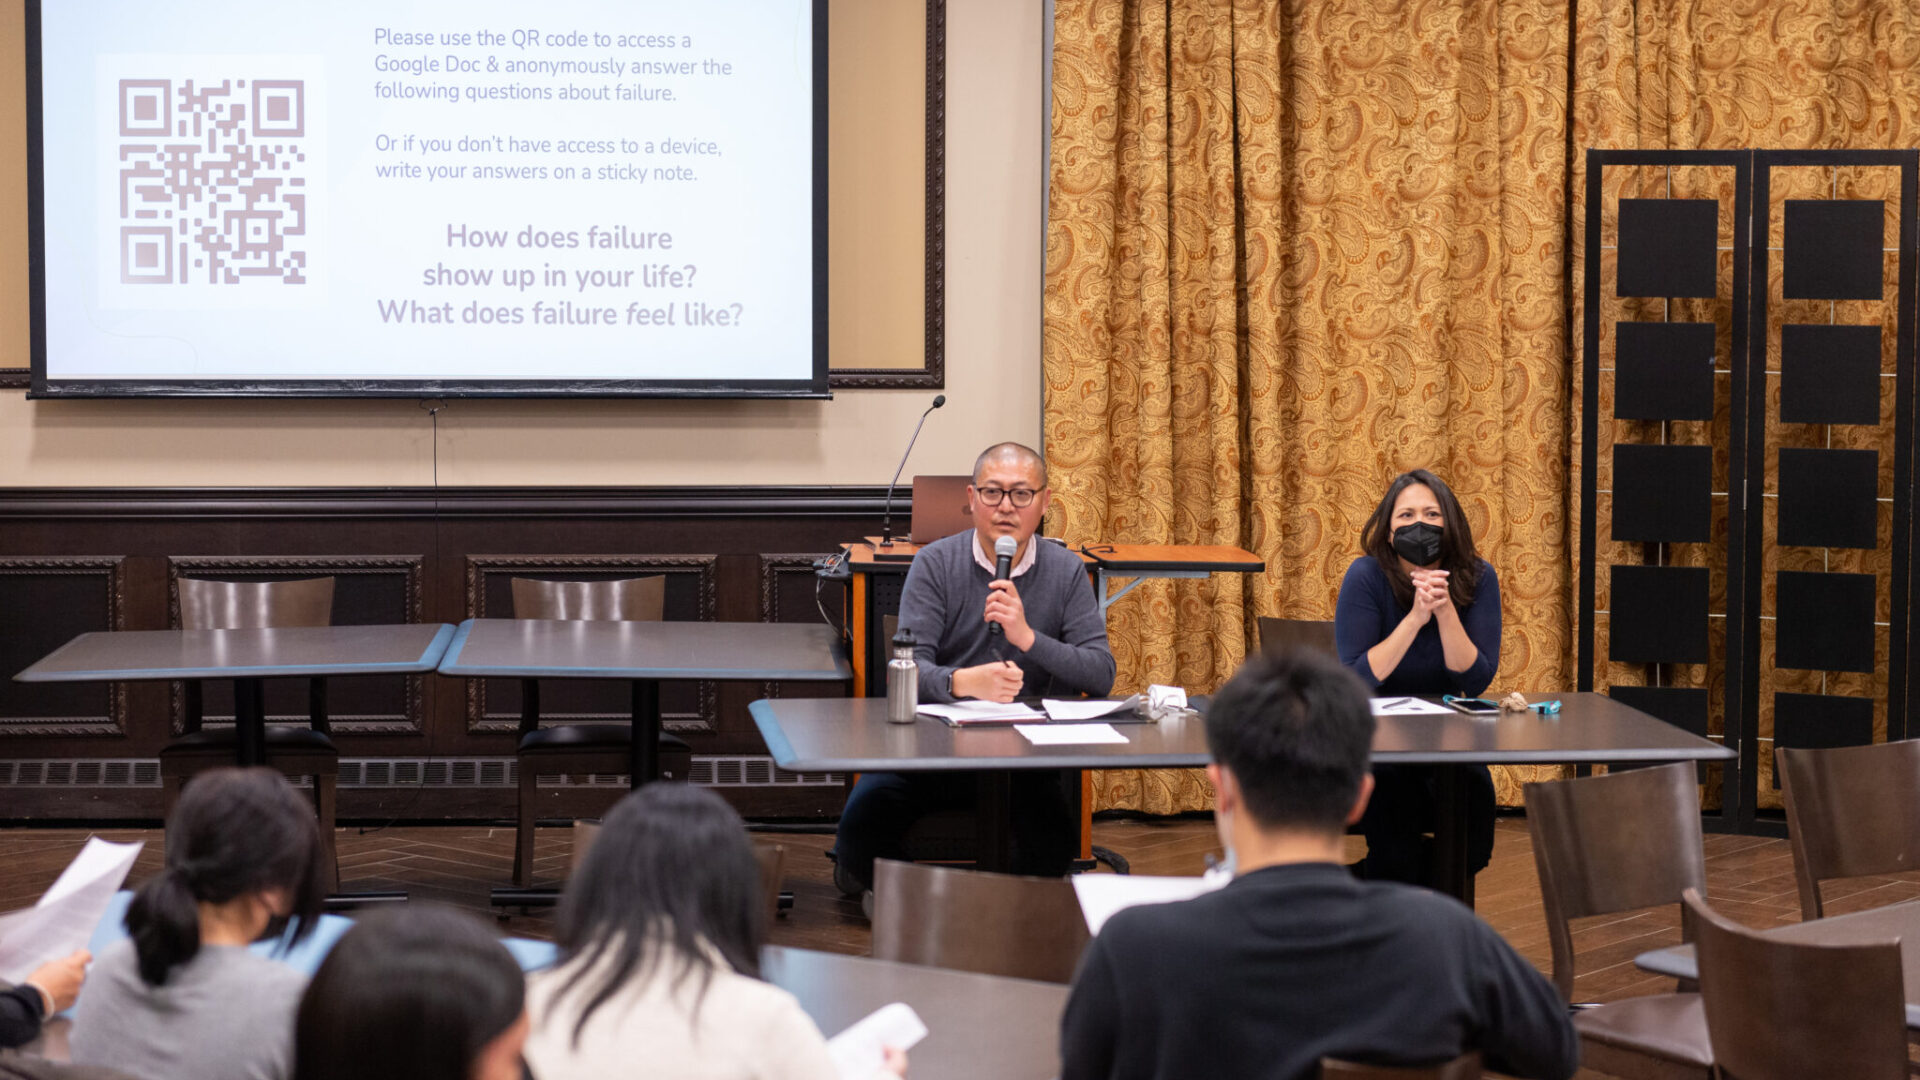 Dr. James Kyung-Jin Lee and Dr. erin Khuê Ninh lead a QCAP Mental Health Workshop, "#AsianFail: Illness and Ingratitude." Lee and Ninh are seated at a table in front of a projection screen.